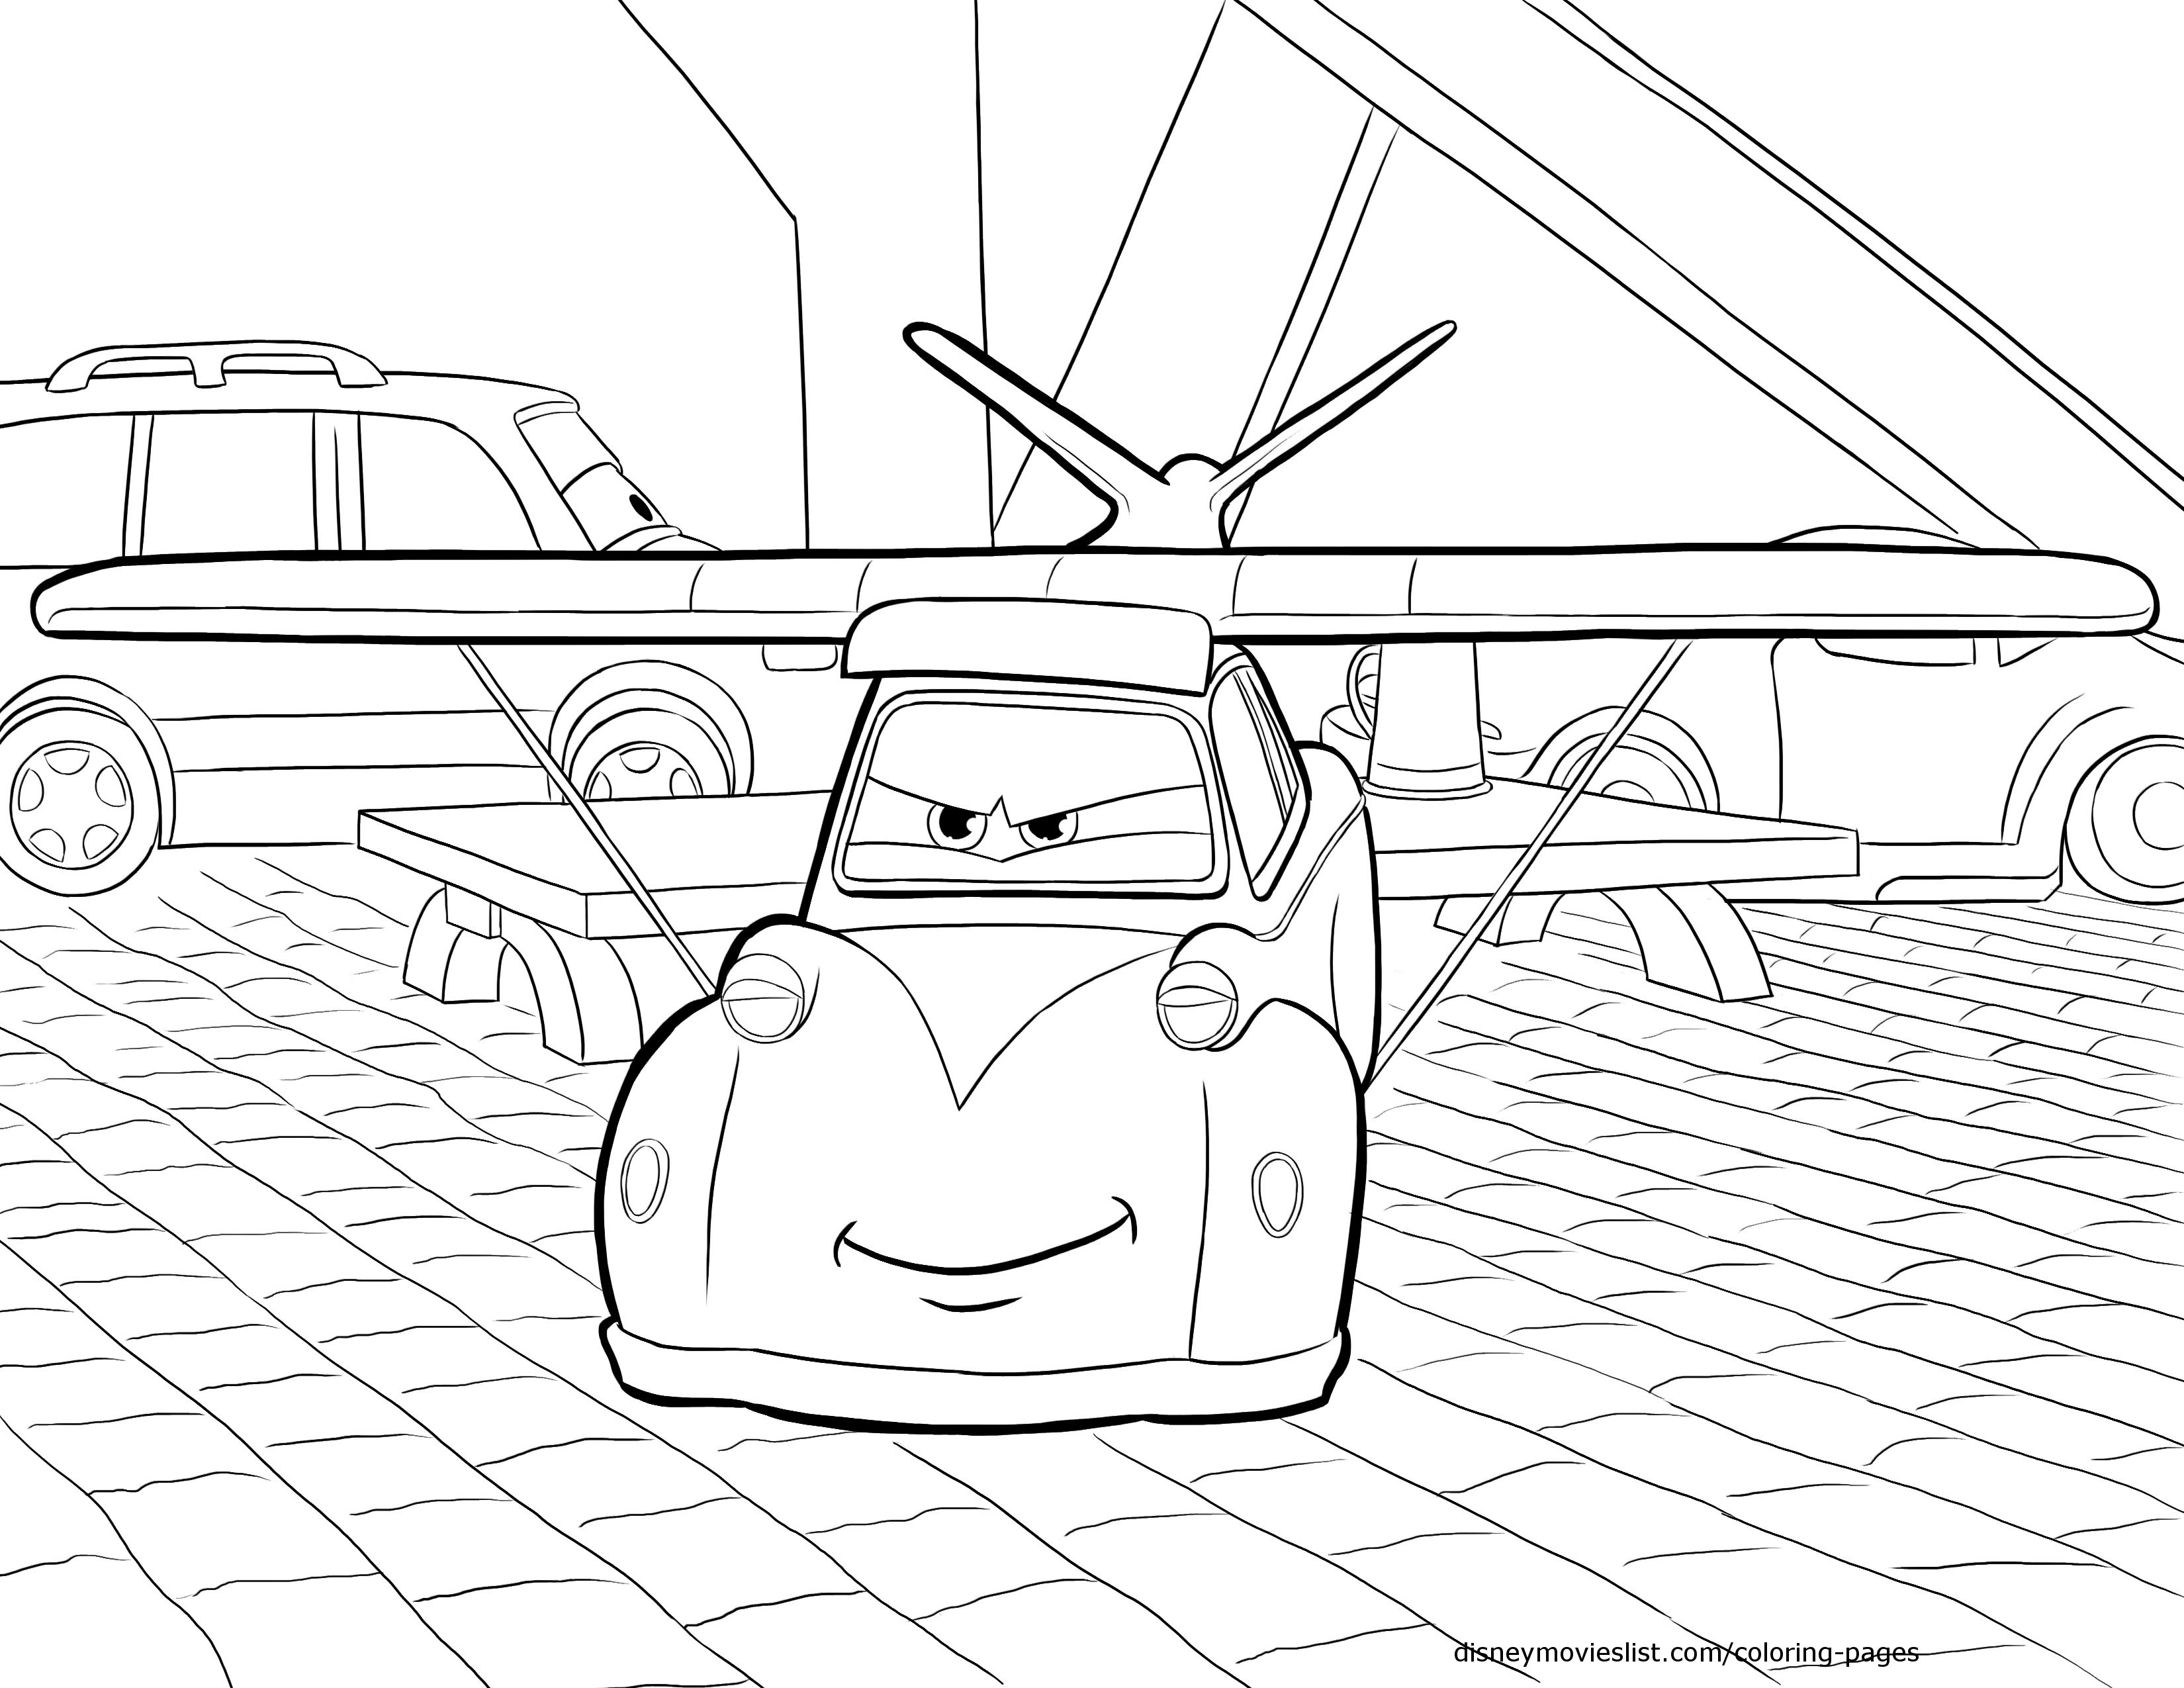 8 Best Images of Disney Planes Printable Coloring Pages - Disney Planes